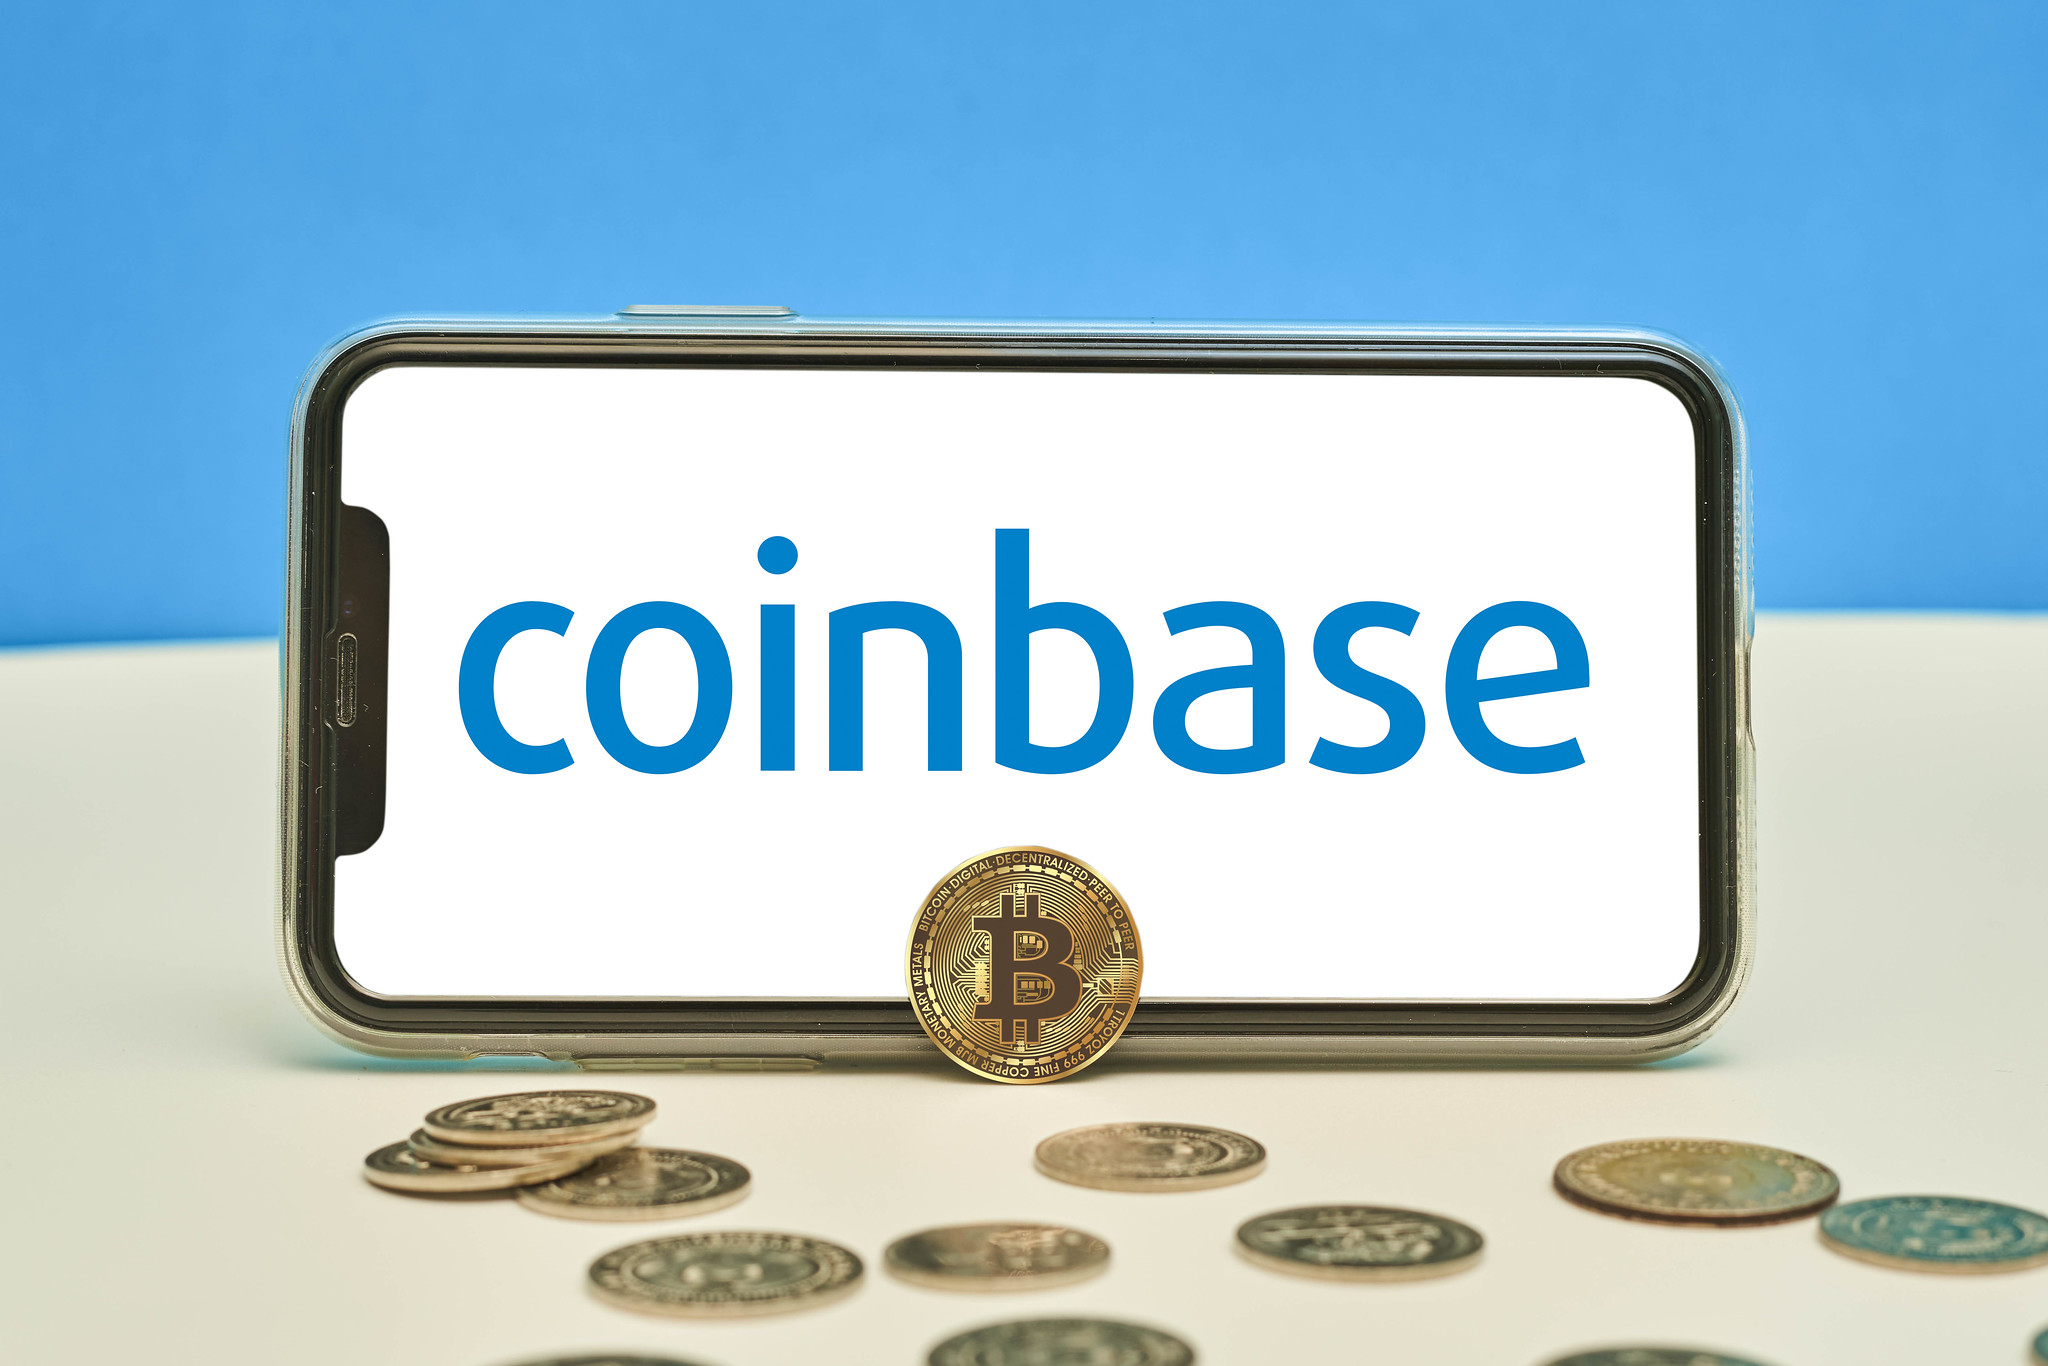 Coinbase Attempts to Push Crypto Legislation Forward in U.S. with Latest Moves